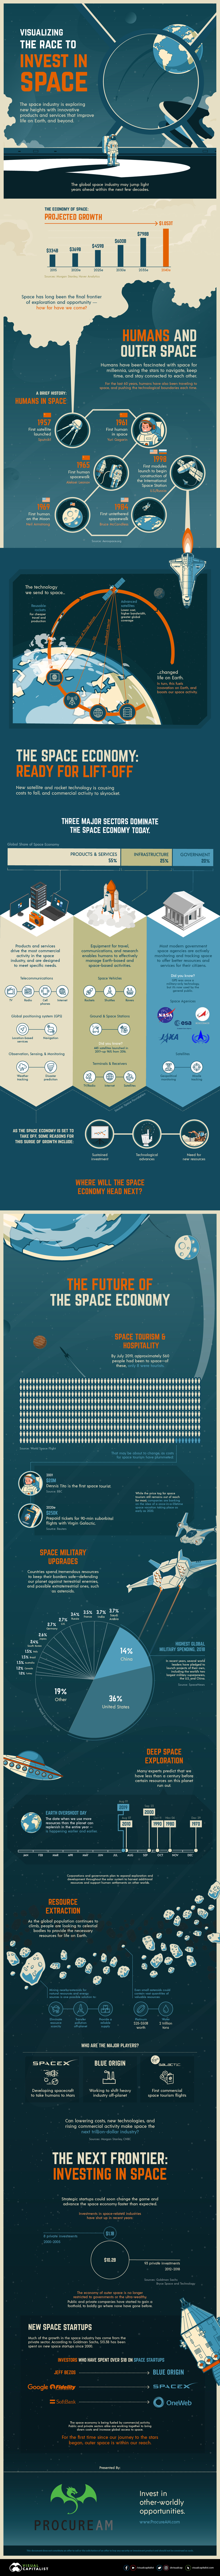 The Race to Invest in the Space Economy